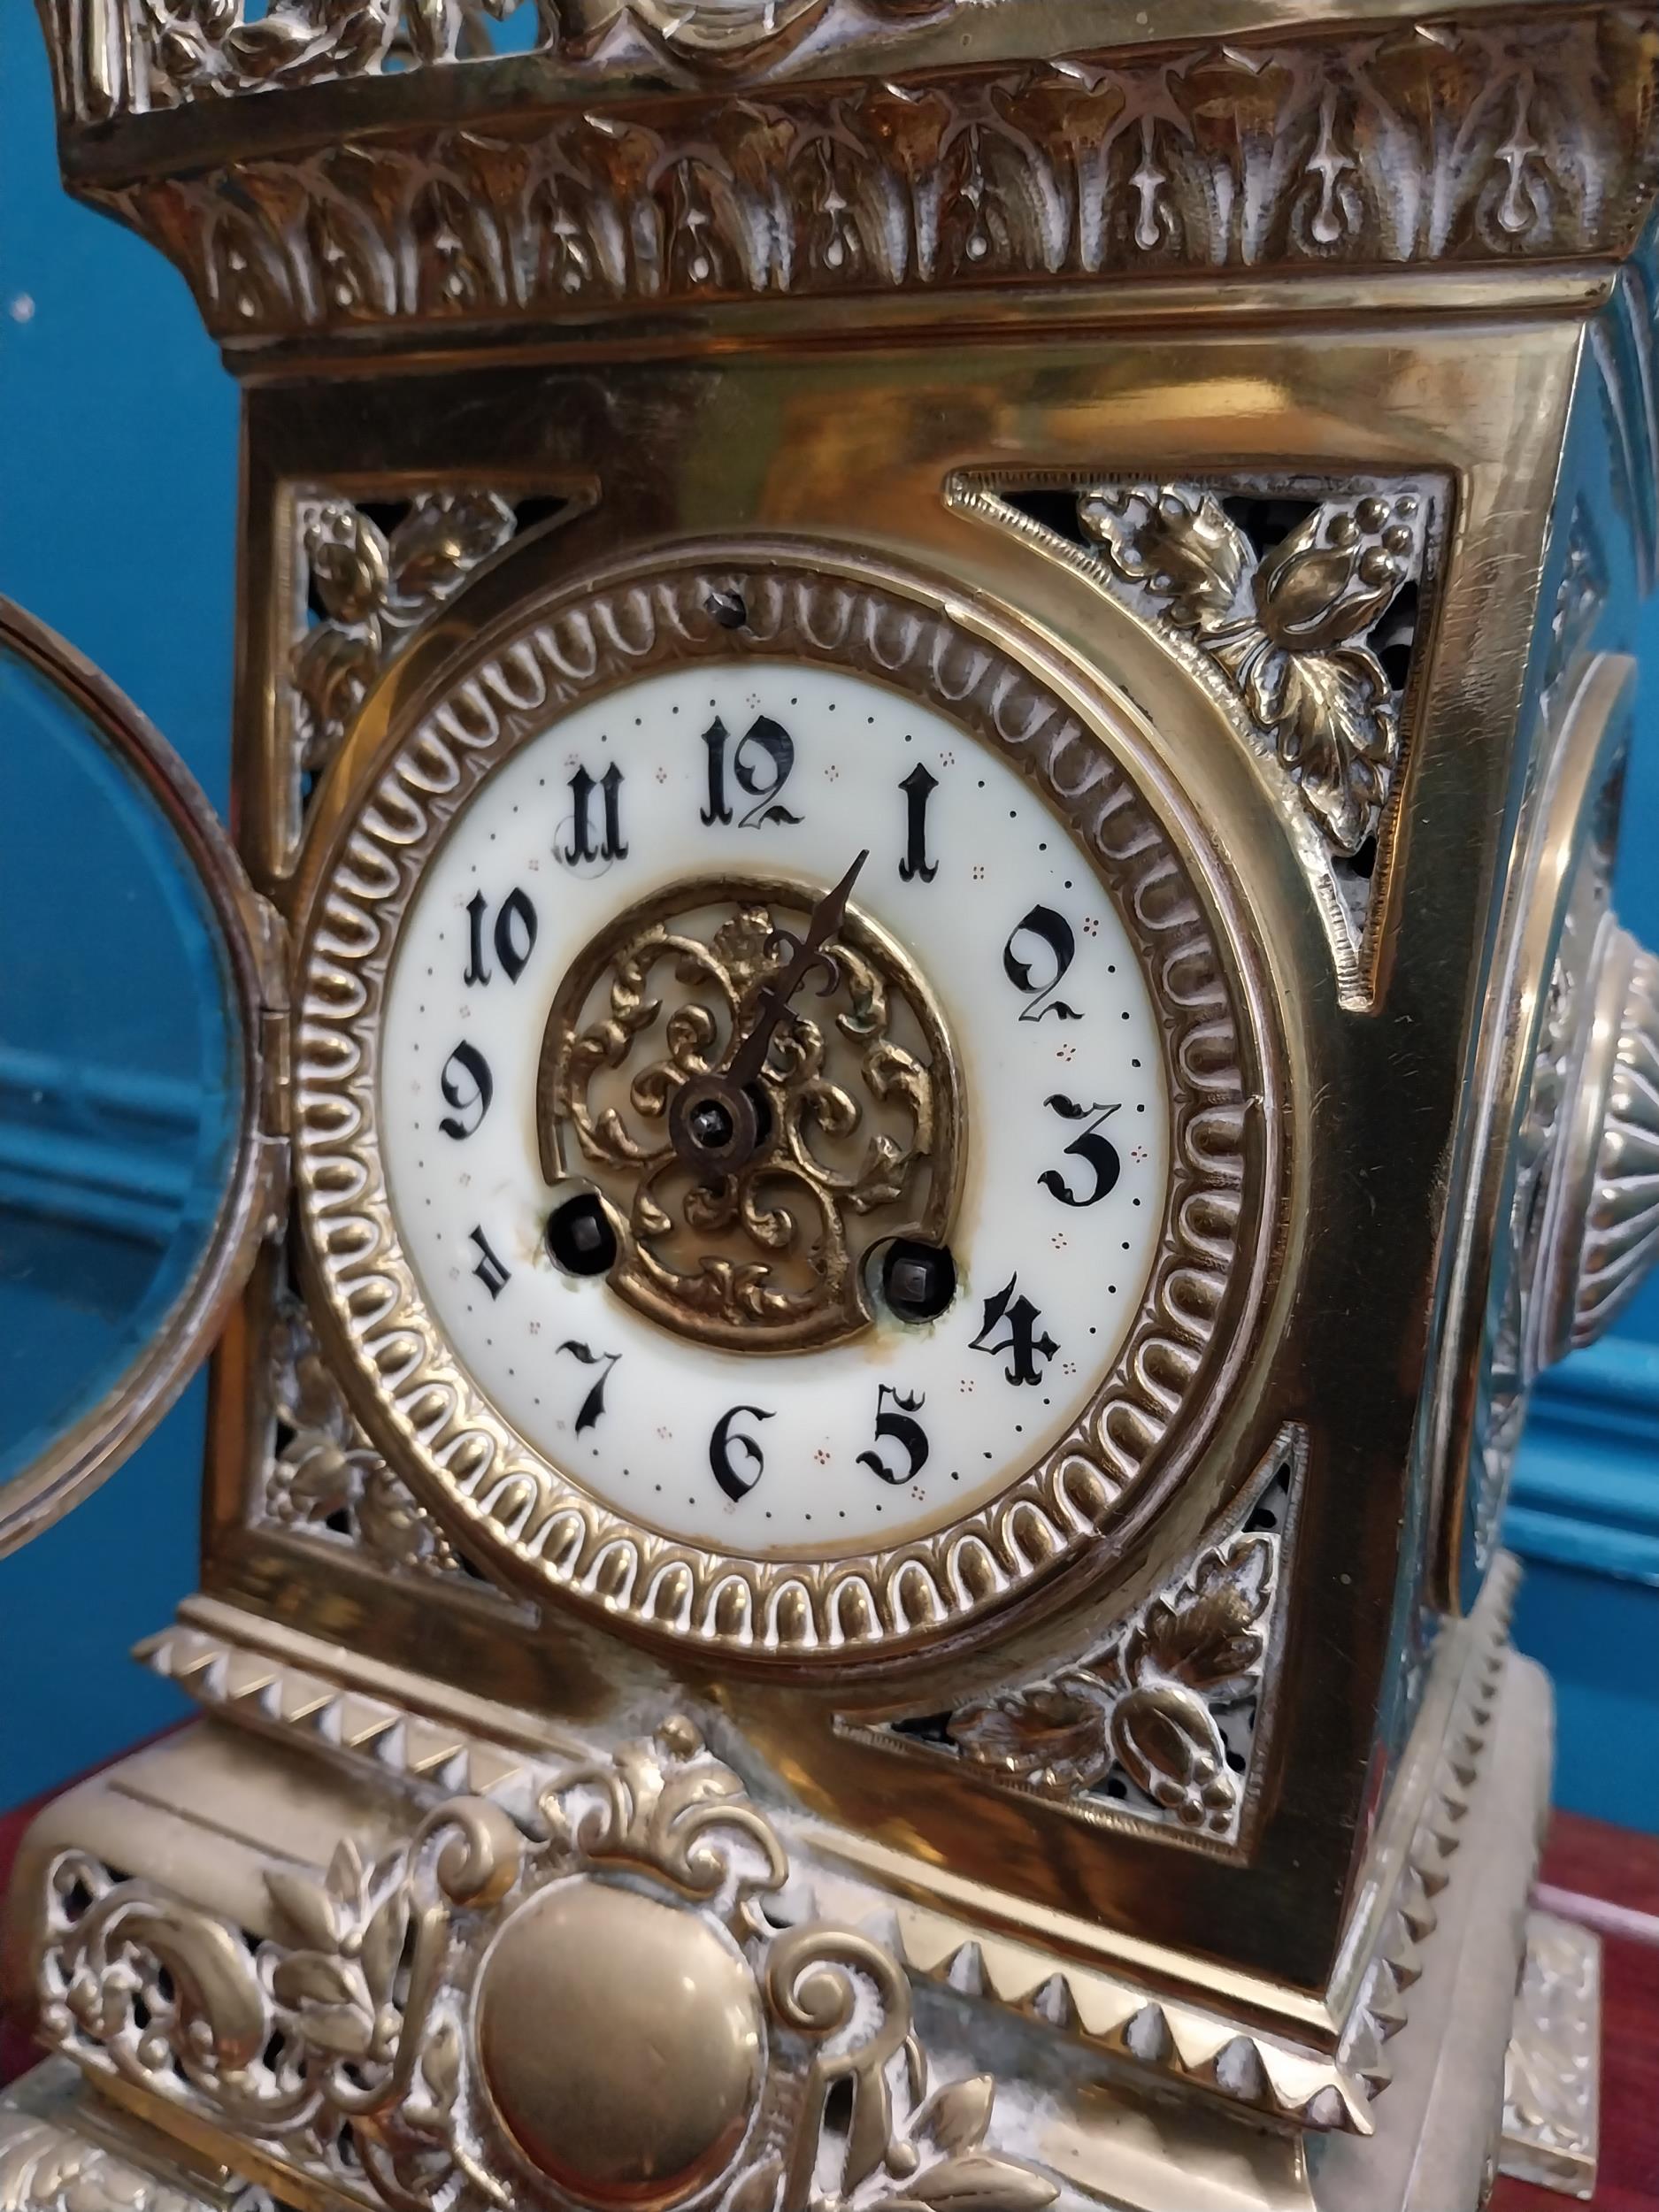 Decorative brass mantle clock in the Victorian style {39 cm H x 19 cm W x 19 cm D}. - Image 5 of 9